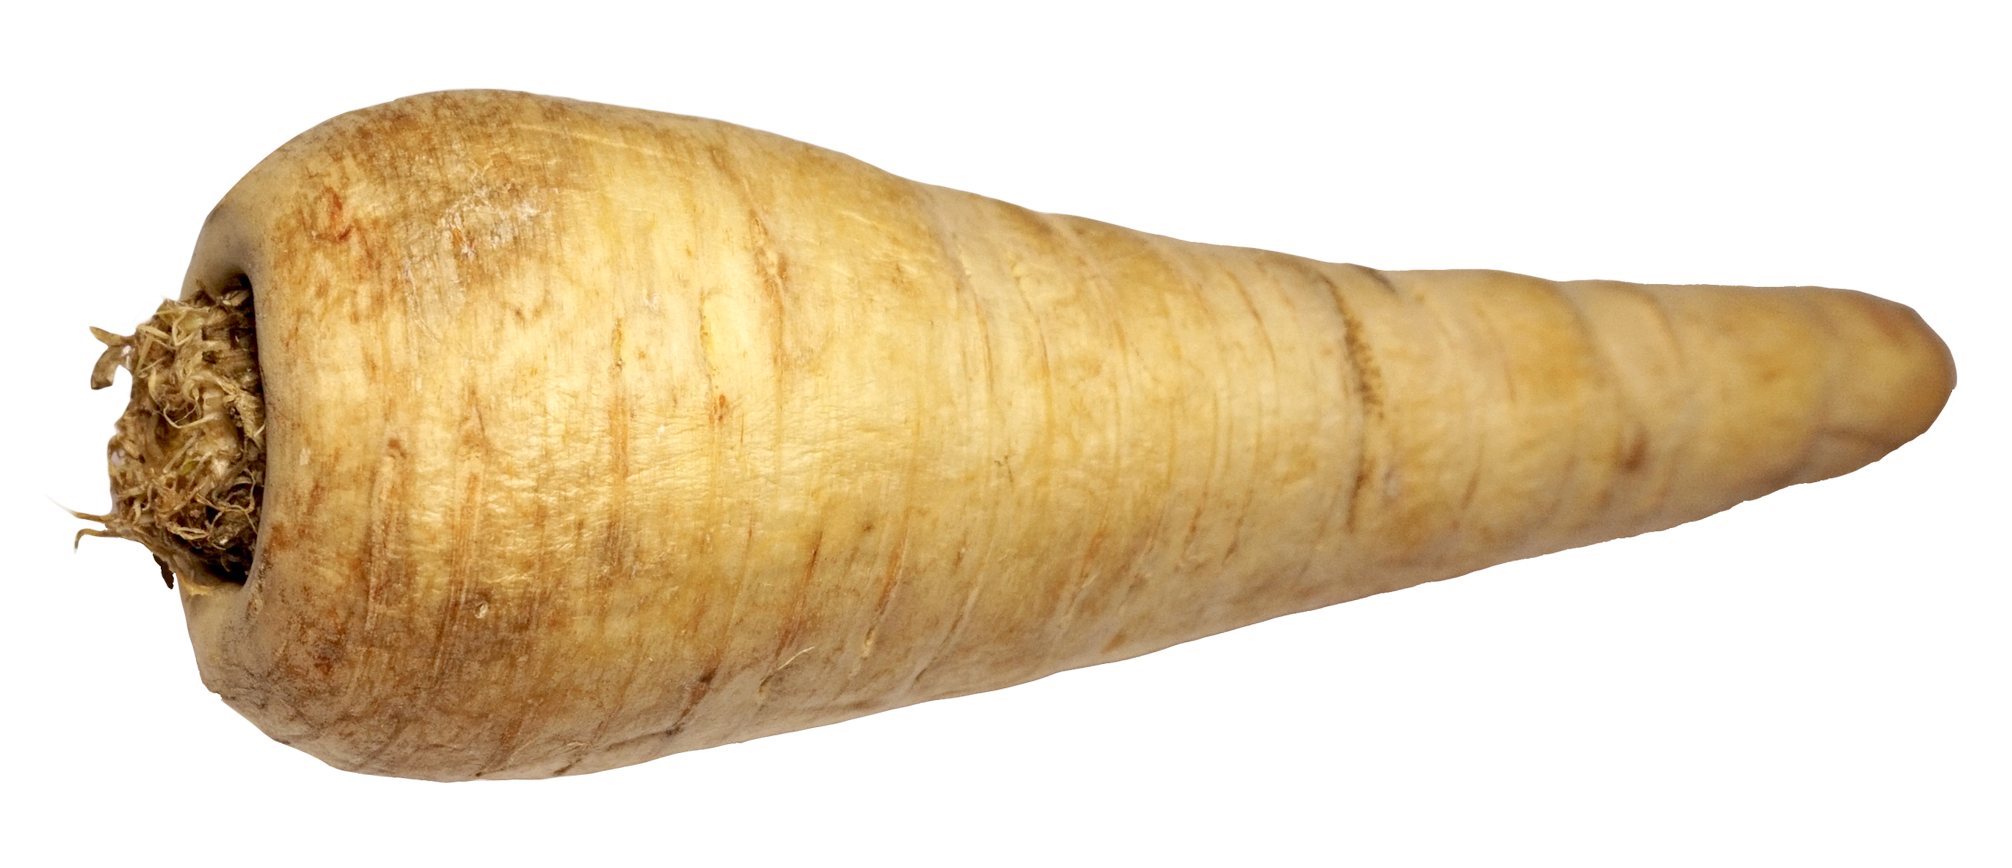 A Close Up Of A Root Vegetable